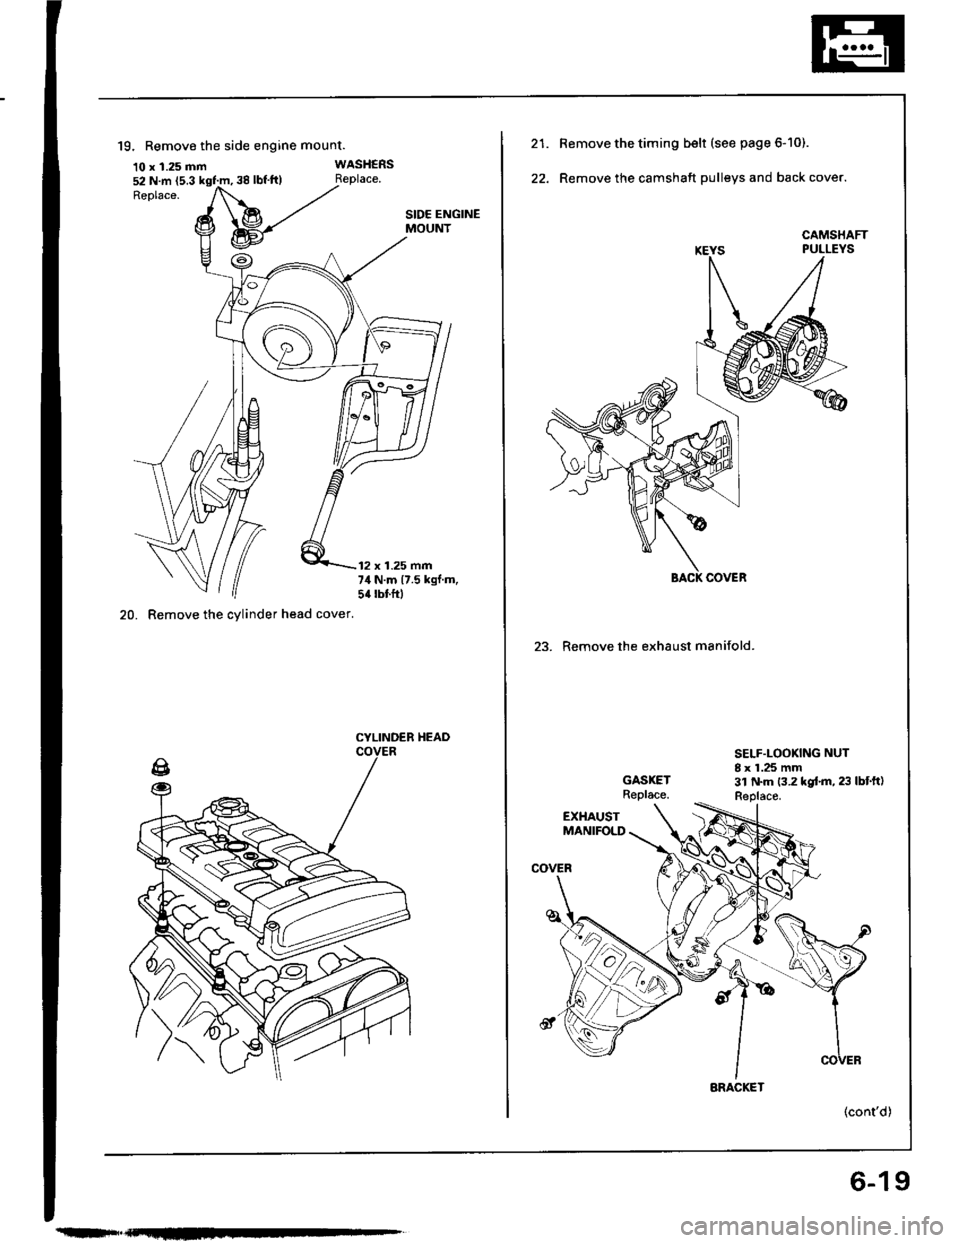 ACURA INTEGRA 1994  Service Repair Manual 52 N.m (5.3 kgtm, 38 lbfft)
19. Remove the side engine mount.
10 x 1.25 mm
20. Remove the cylinder head cover.
WASHERS
SIDE ENGINEMOUNT
12 x 1.25 mm74 N.m {7.5 kgf.m,5{ rbtftl
CYLINDEB HEAD
Remove t